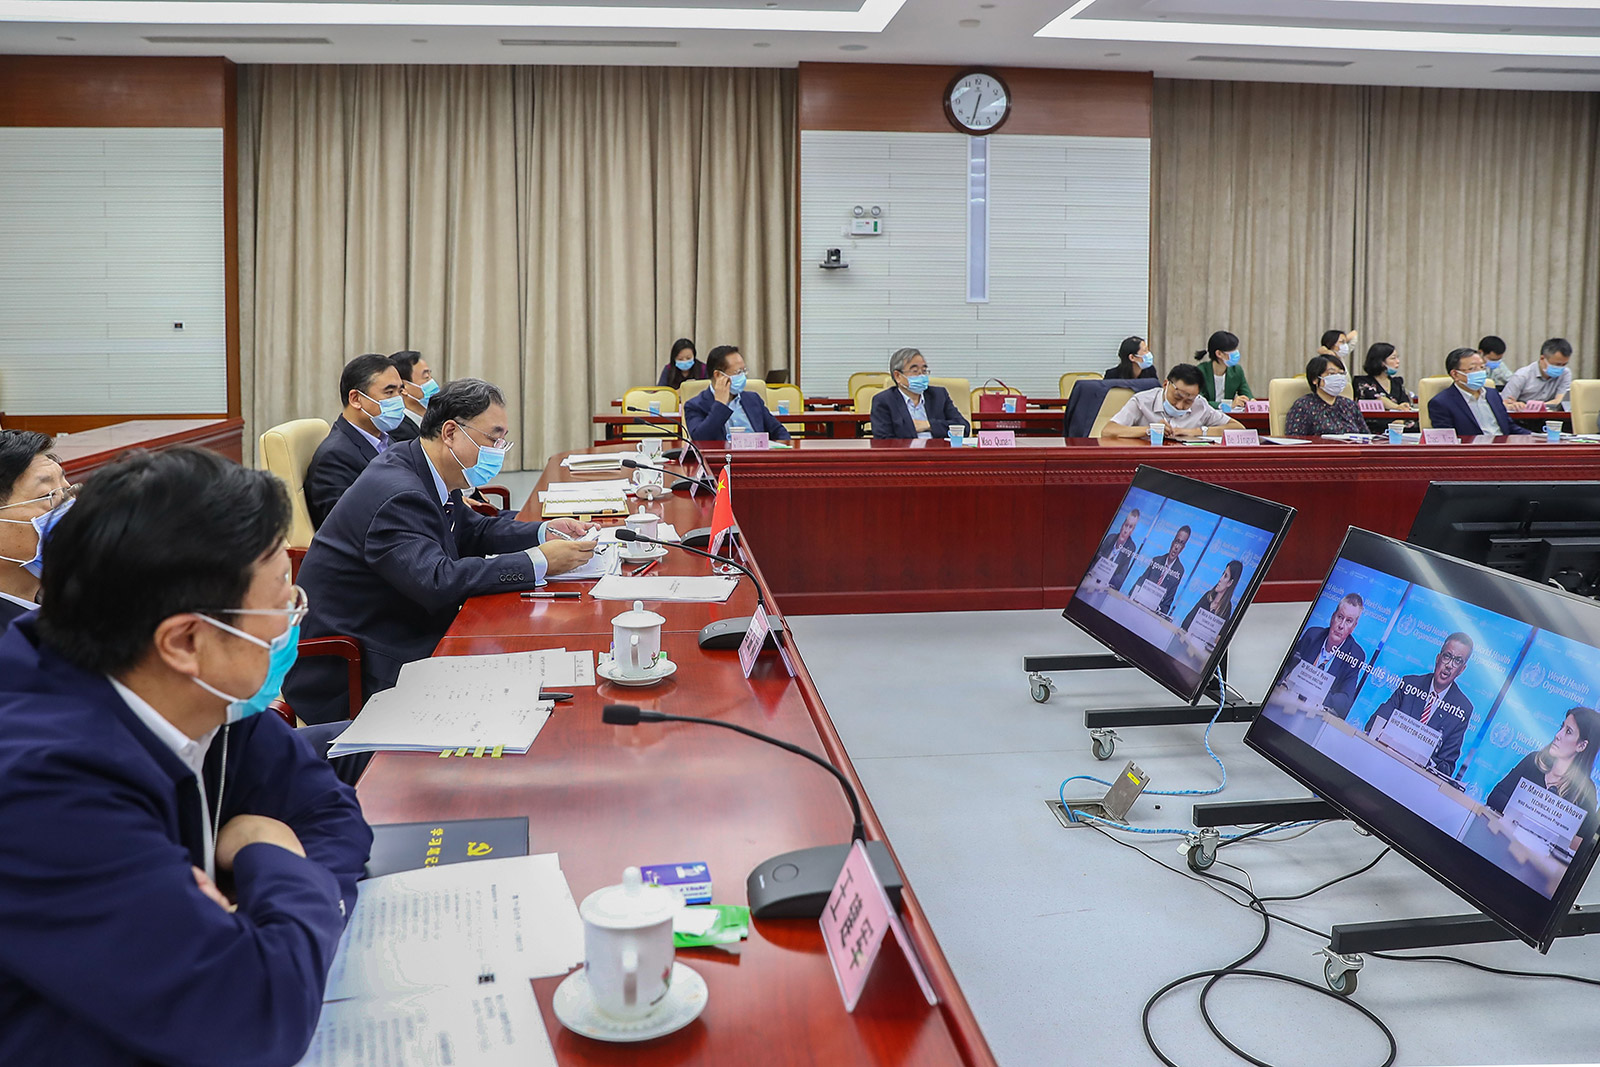 Delegates attend the 73rd World Health Assembly via video conference in Beijing on Monday.